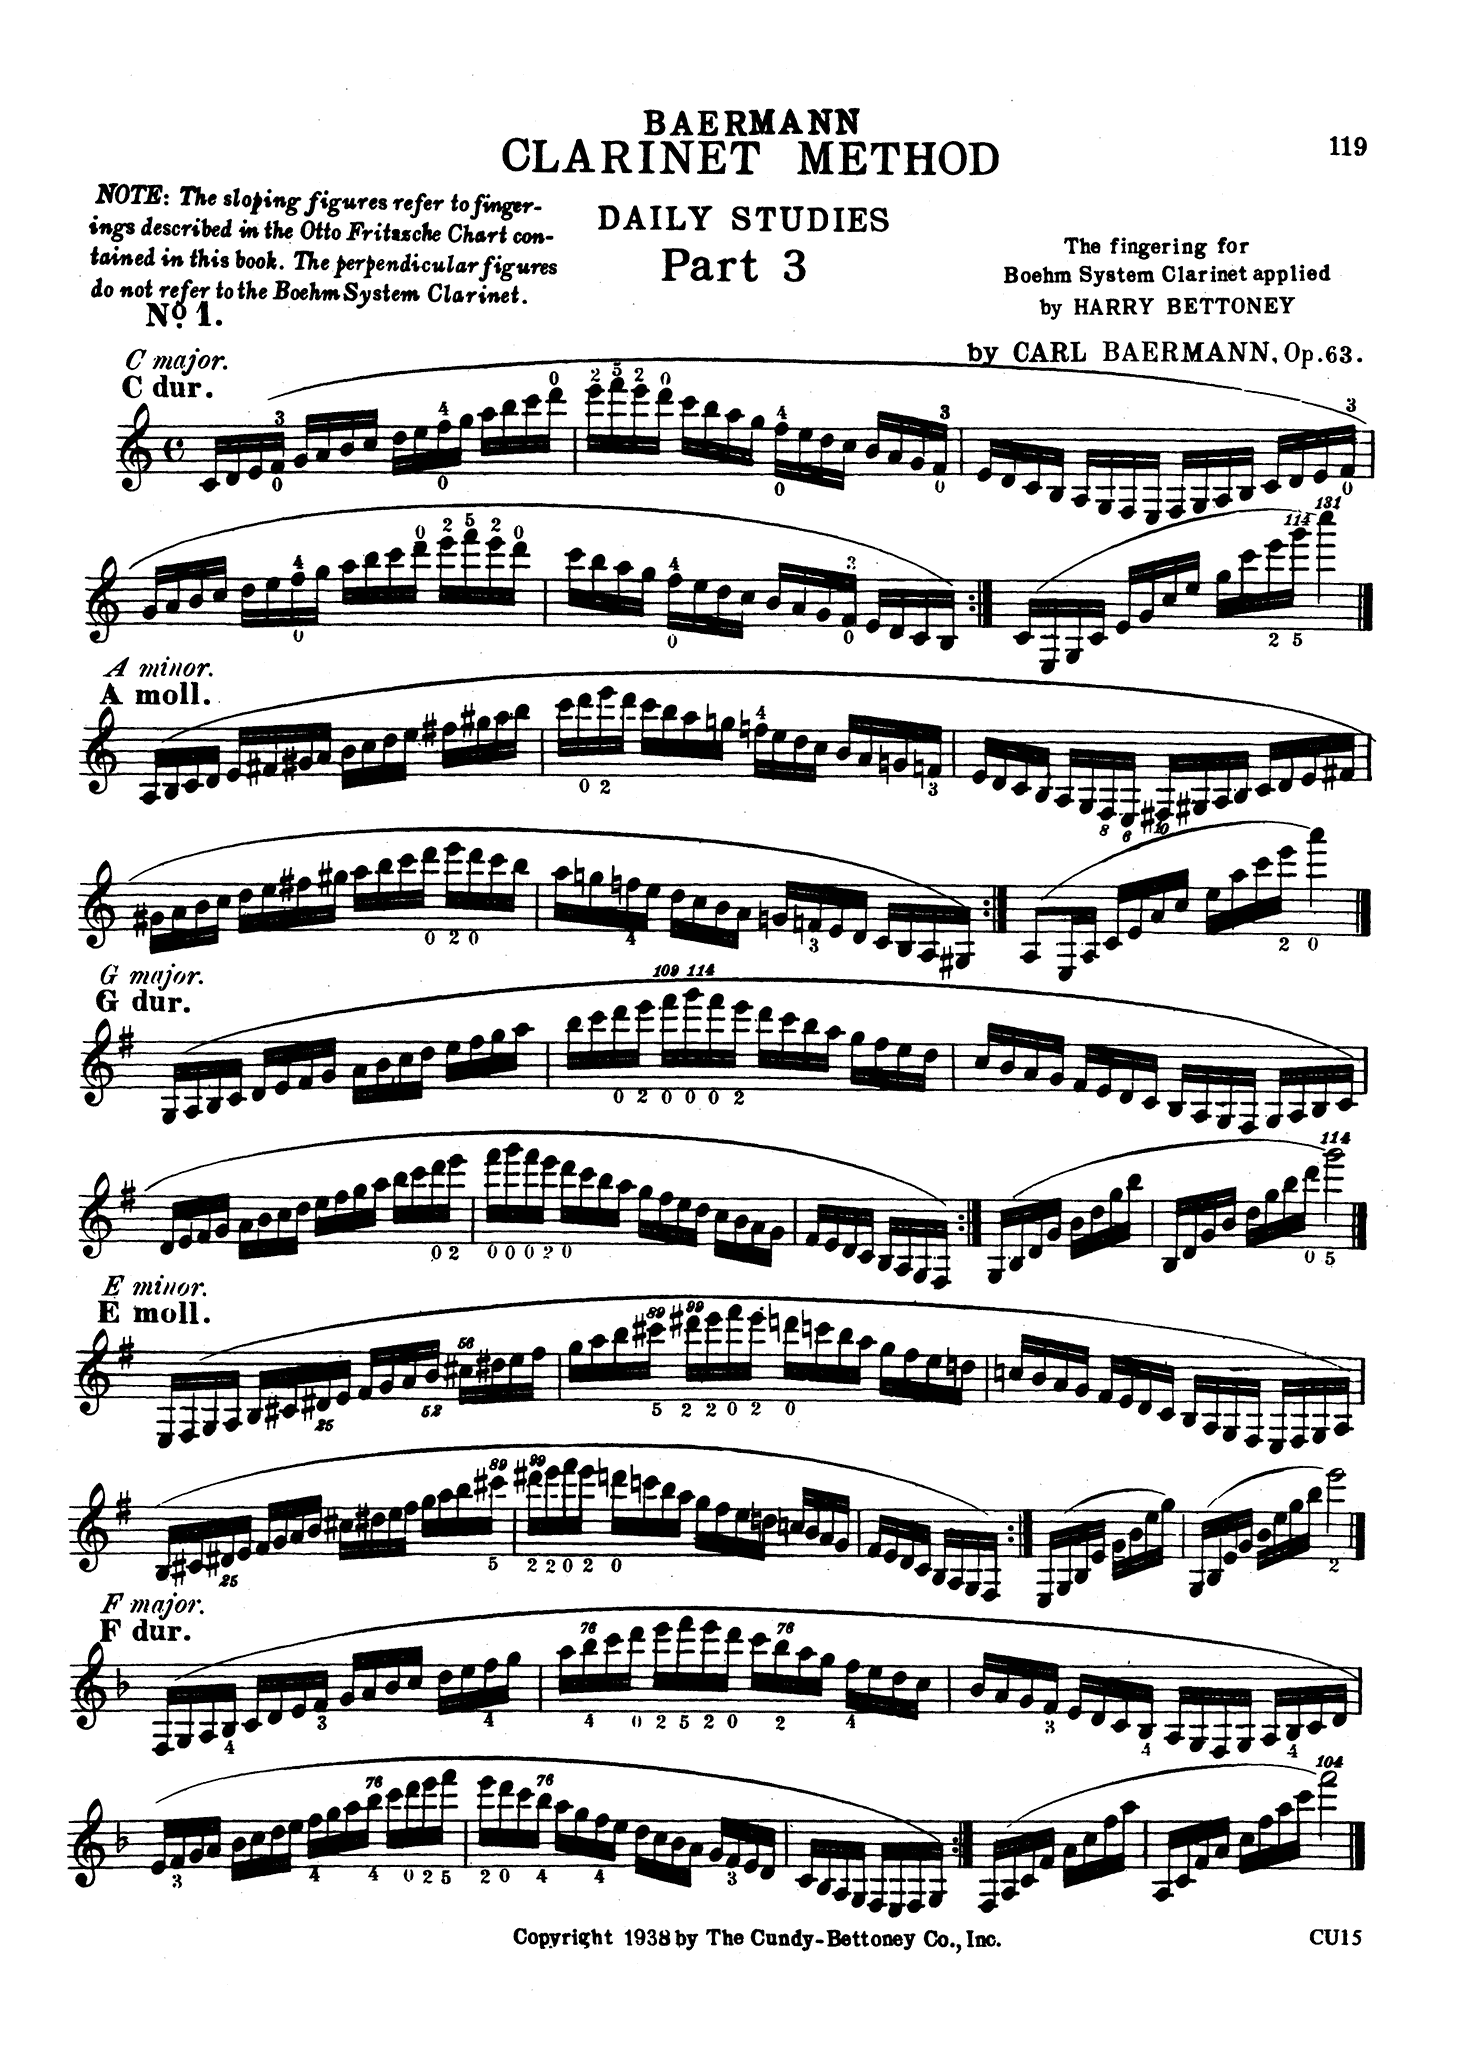 Complete Clarinet Method, Op. 63: Division 3 (Daily Studies) Page 119